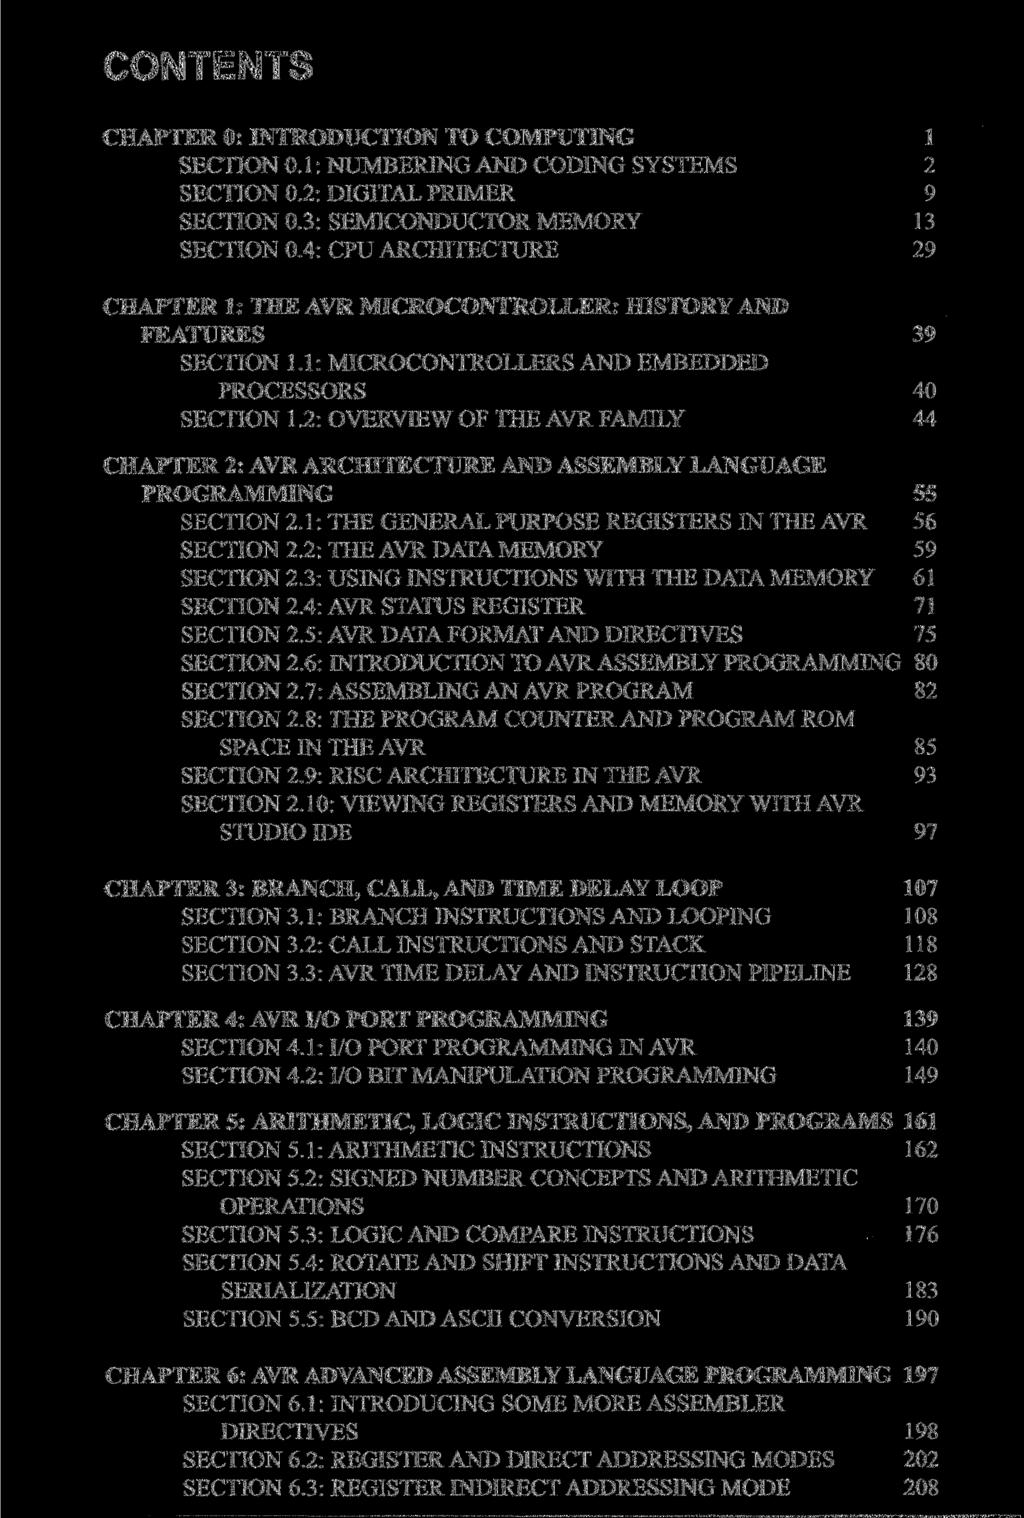 CONTENTS CHAPTER 0: INTRODUCTION TO COMPUTING 1 SECTION 0.1: NUMBERING AND CODING SYSTEMS 2 SECTION 0.2: DIGITAL PRIMER 9 SECTION 0.3: SEMICONDUCTOR MEMORY 13 SECTION 0.